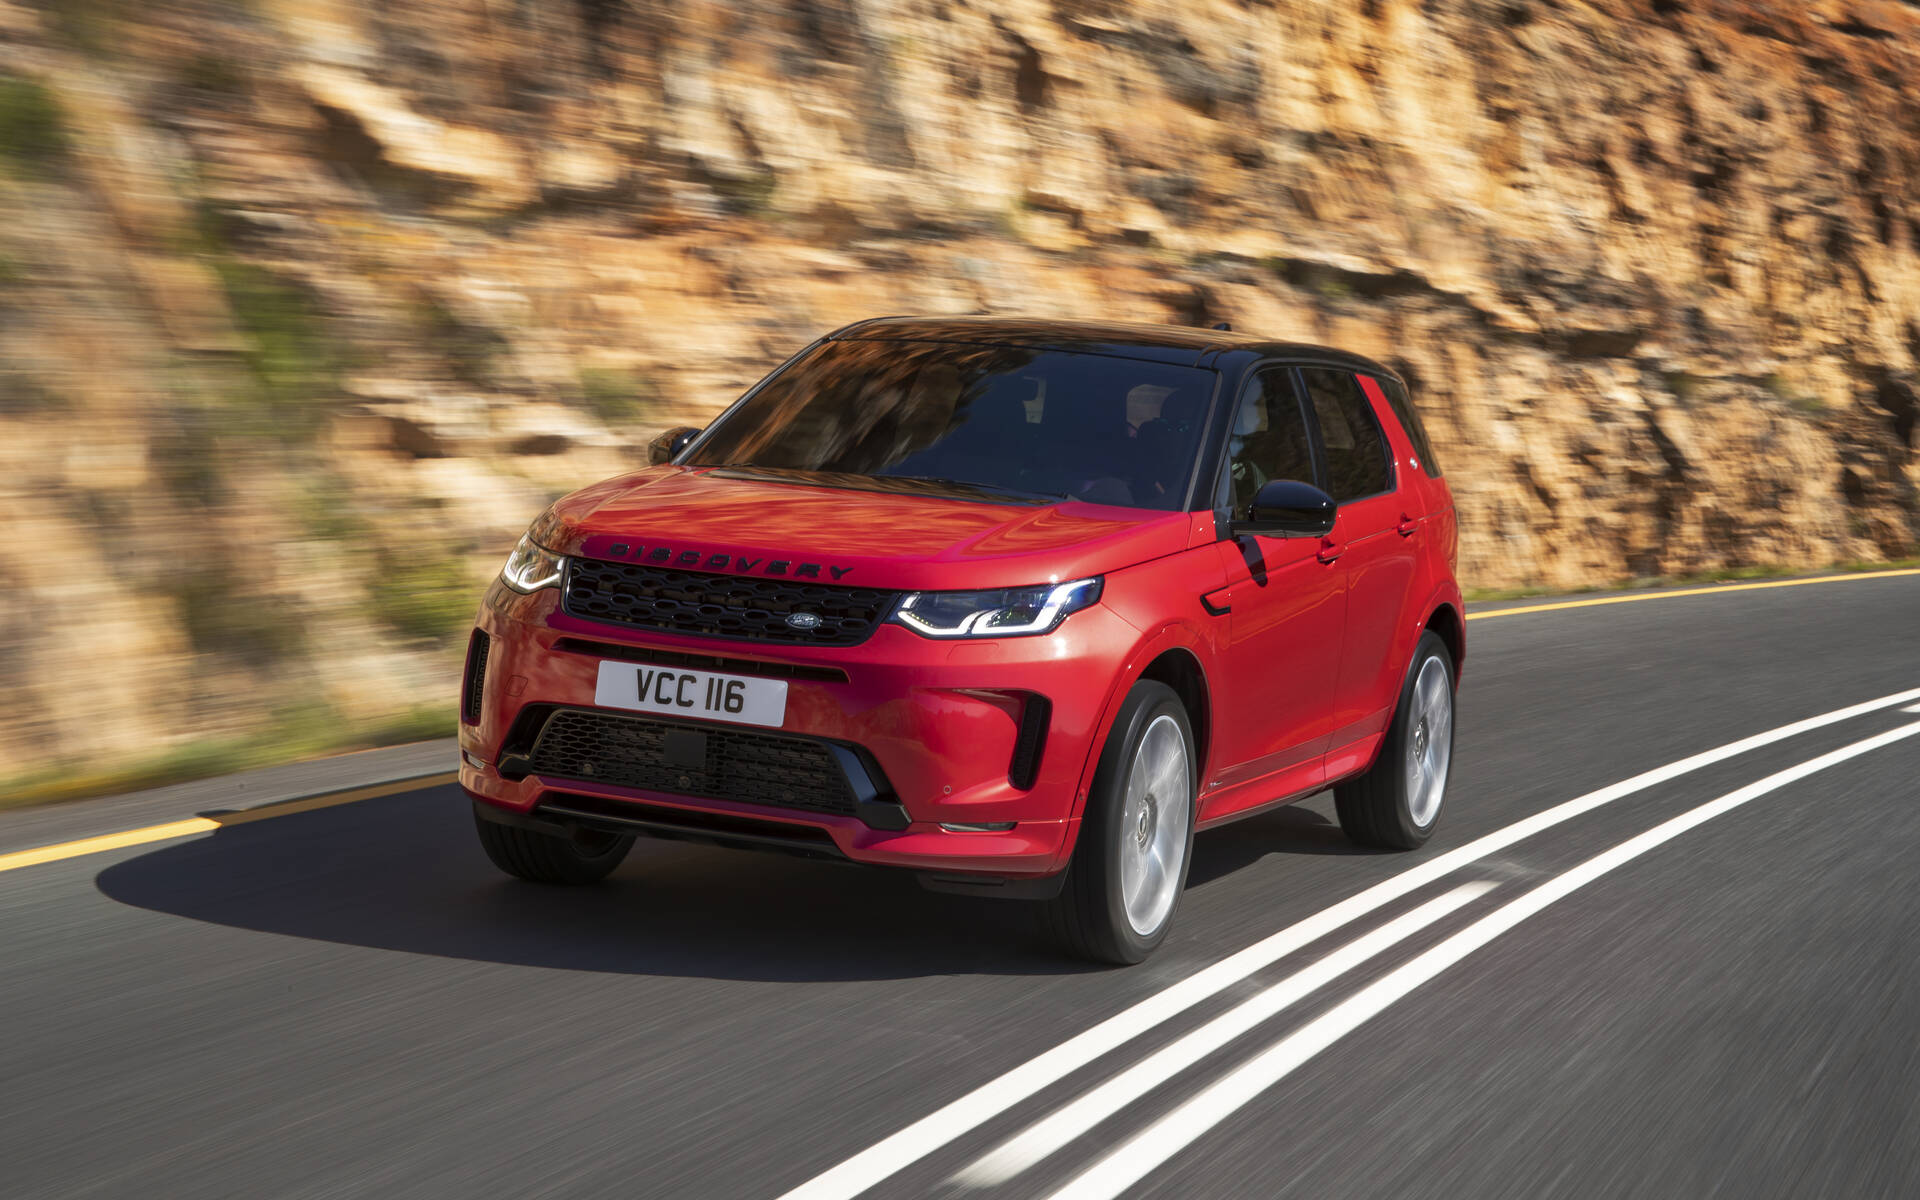 2021 land rover discovery blue